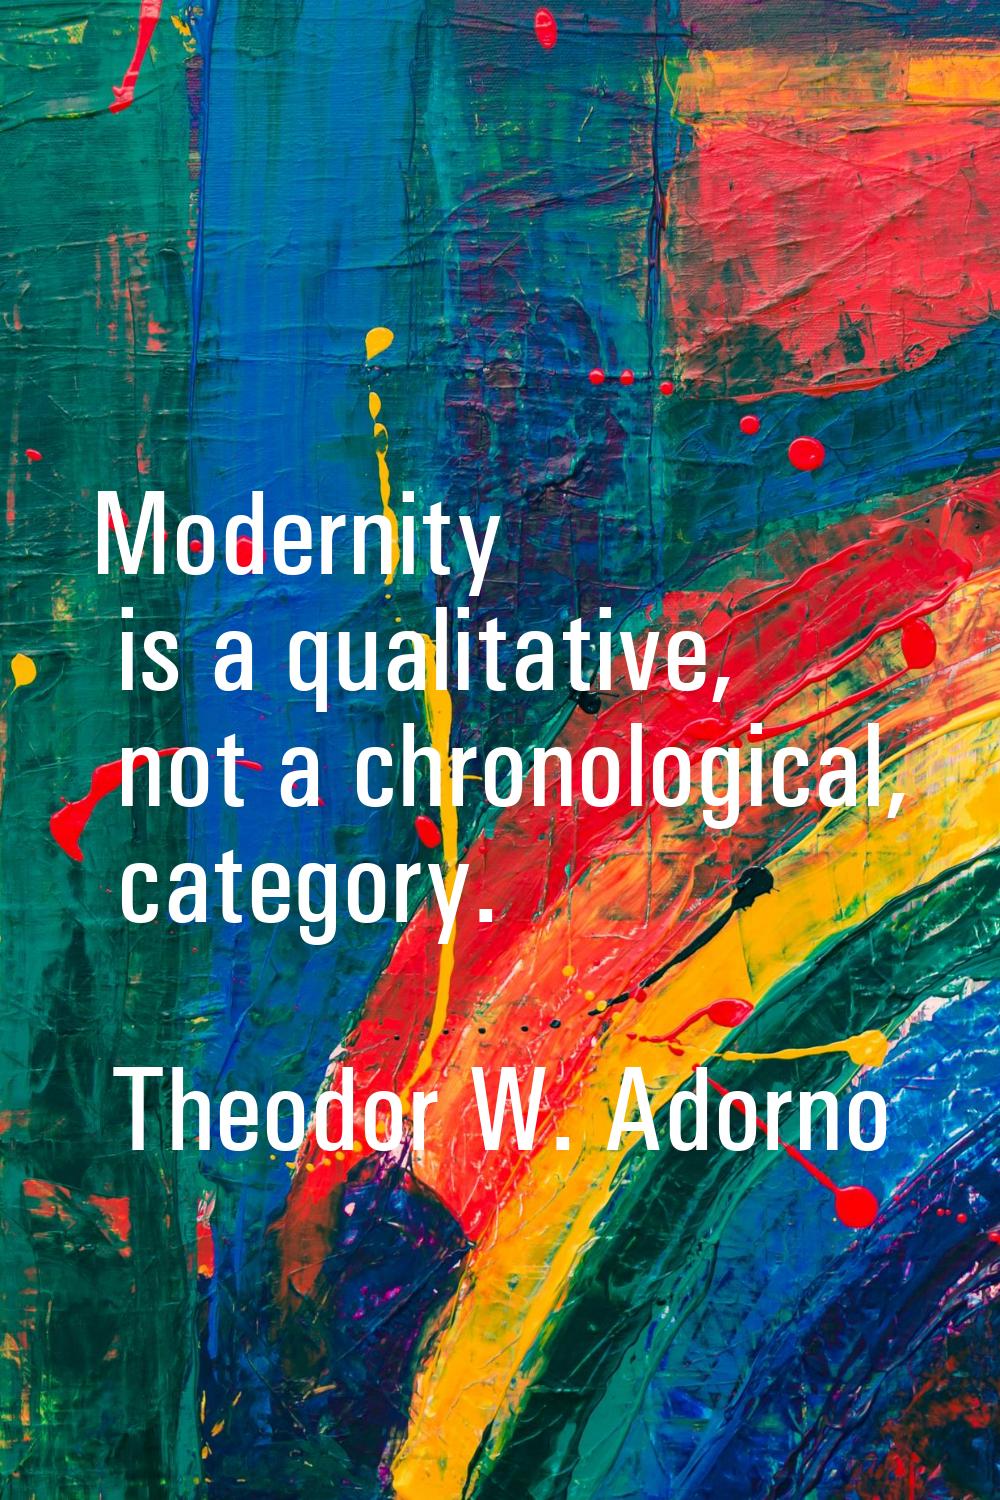 Modernity is a qualitative, not a chronological, category.